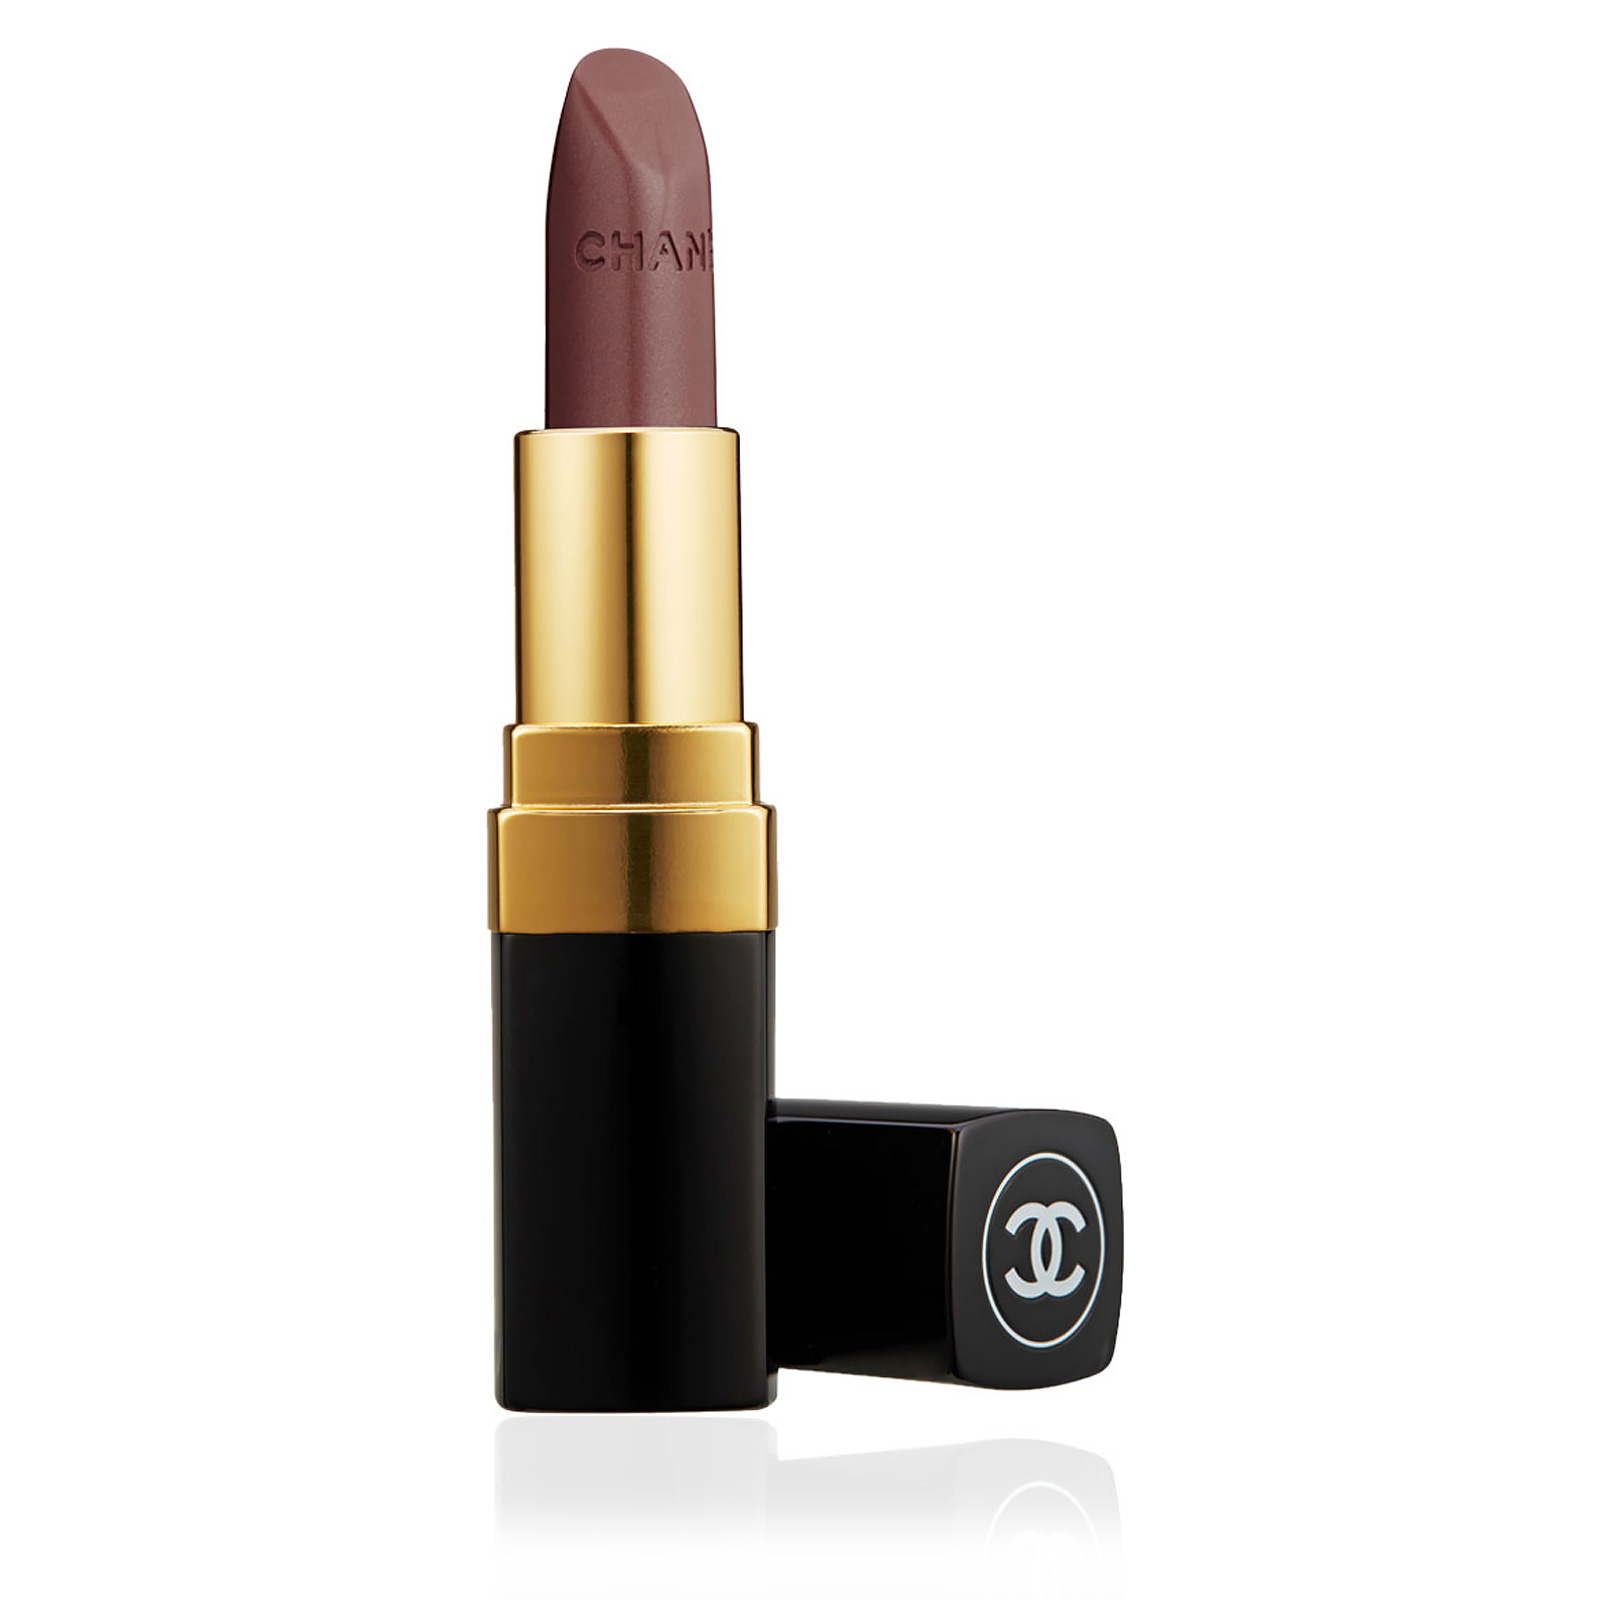 CHANEL, ROUGE COCO